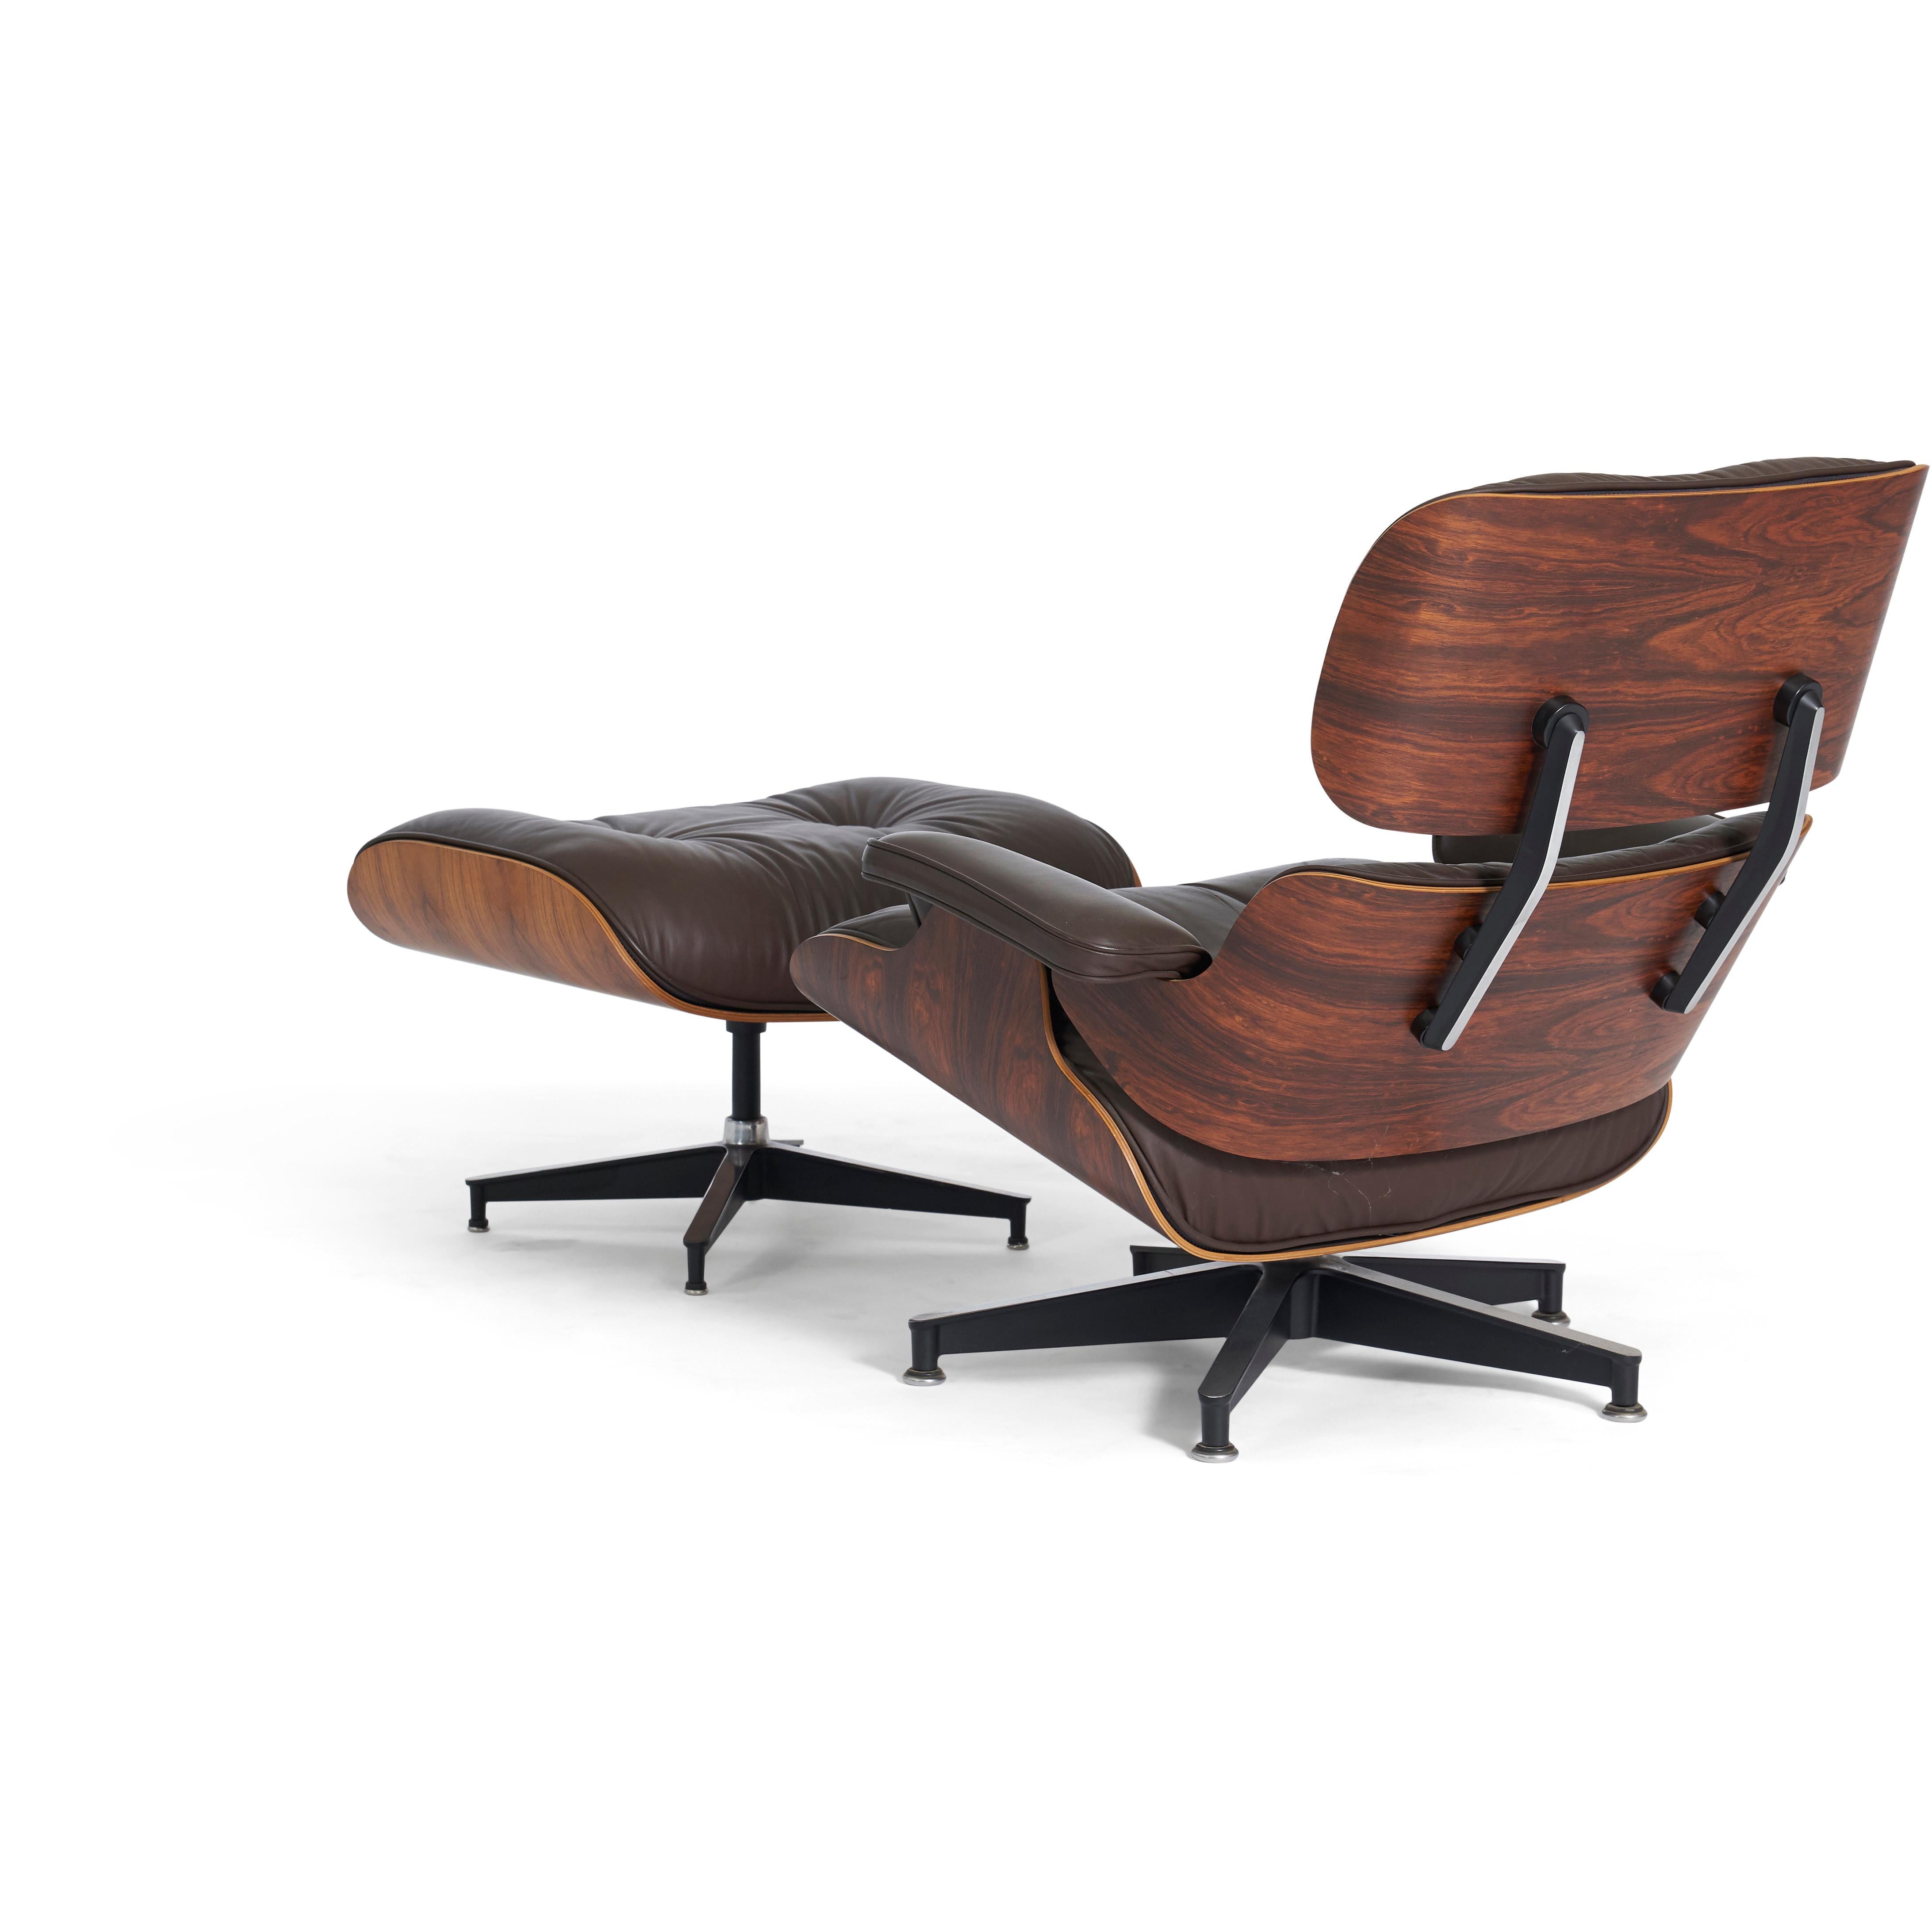 Rosewood lounge chair and ottoman designed by Charles and Ray Eames for Herman Miller in the 1950s. This particular set date to 1970s productions Original dark brown leather with all original rosewood shells.